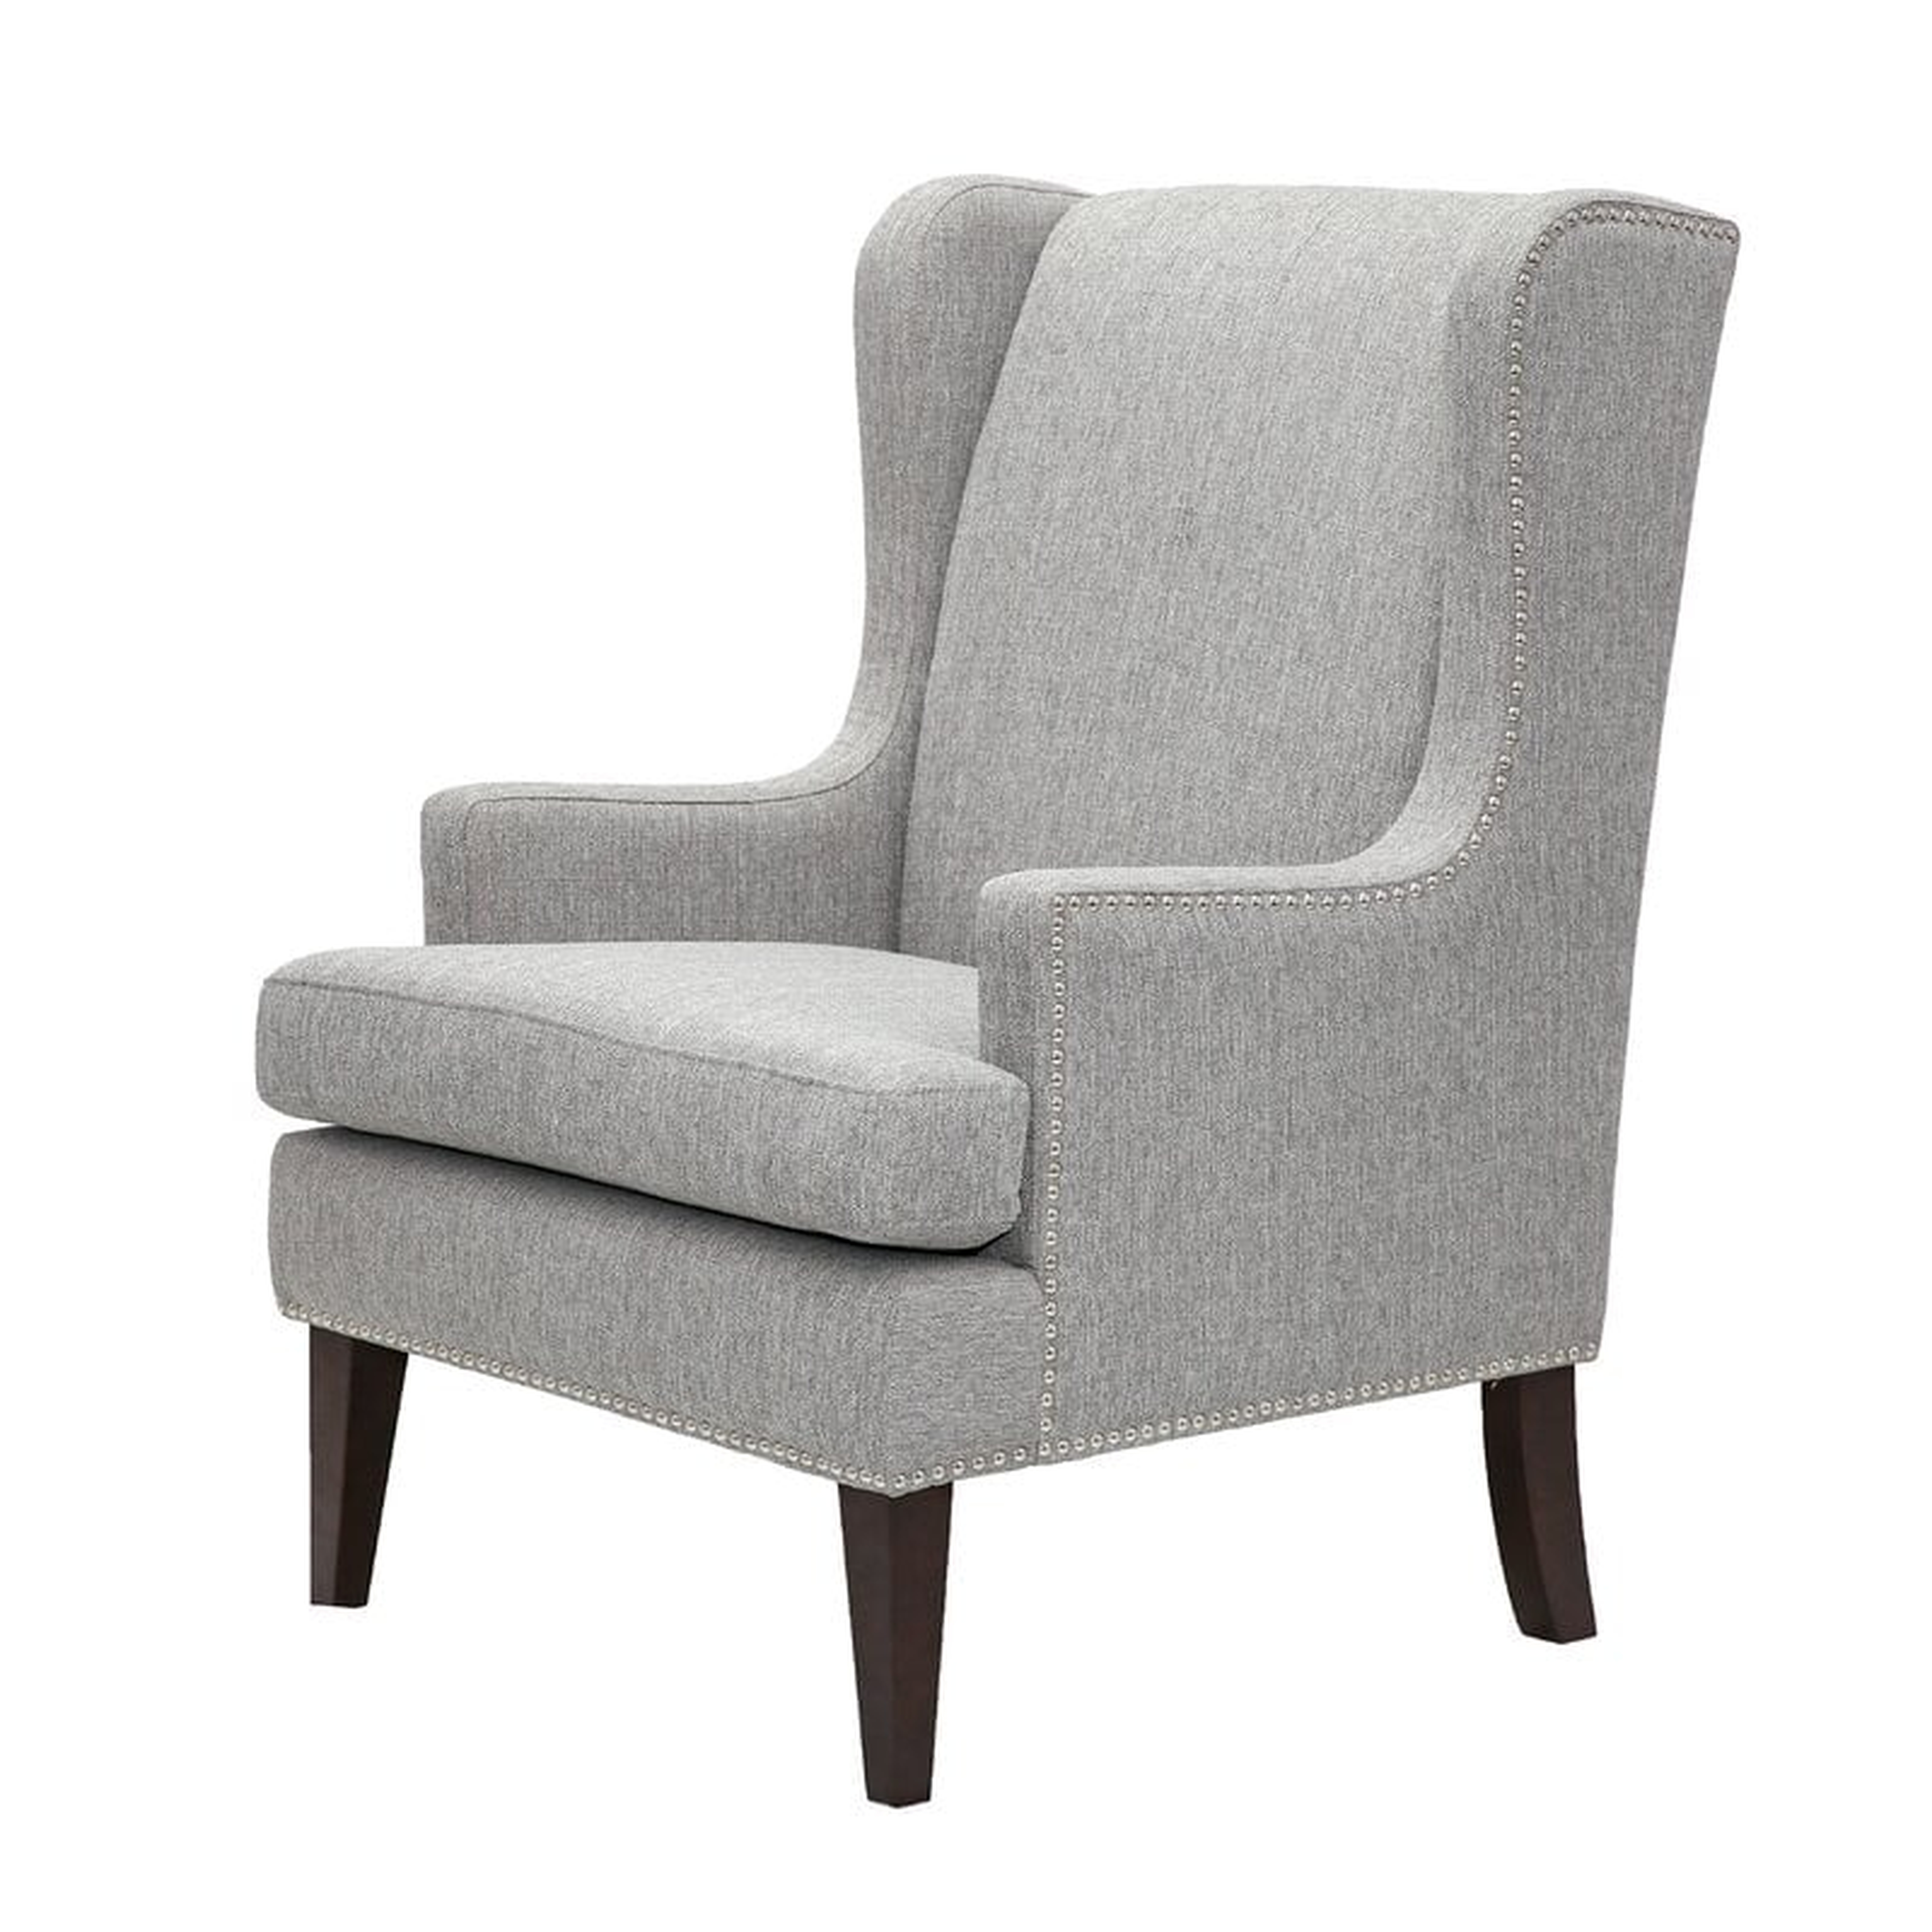 Alvis 29" Wide Polyester Wingback Chair, Gray - Wayfair